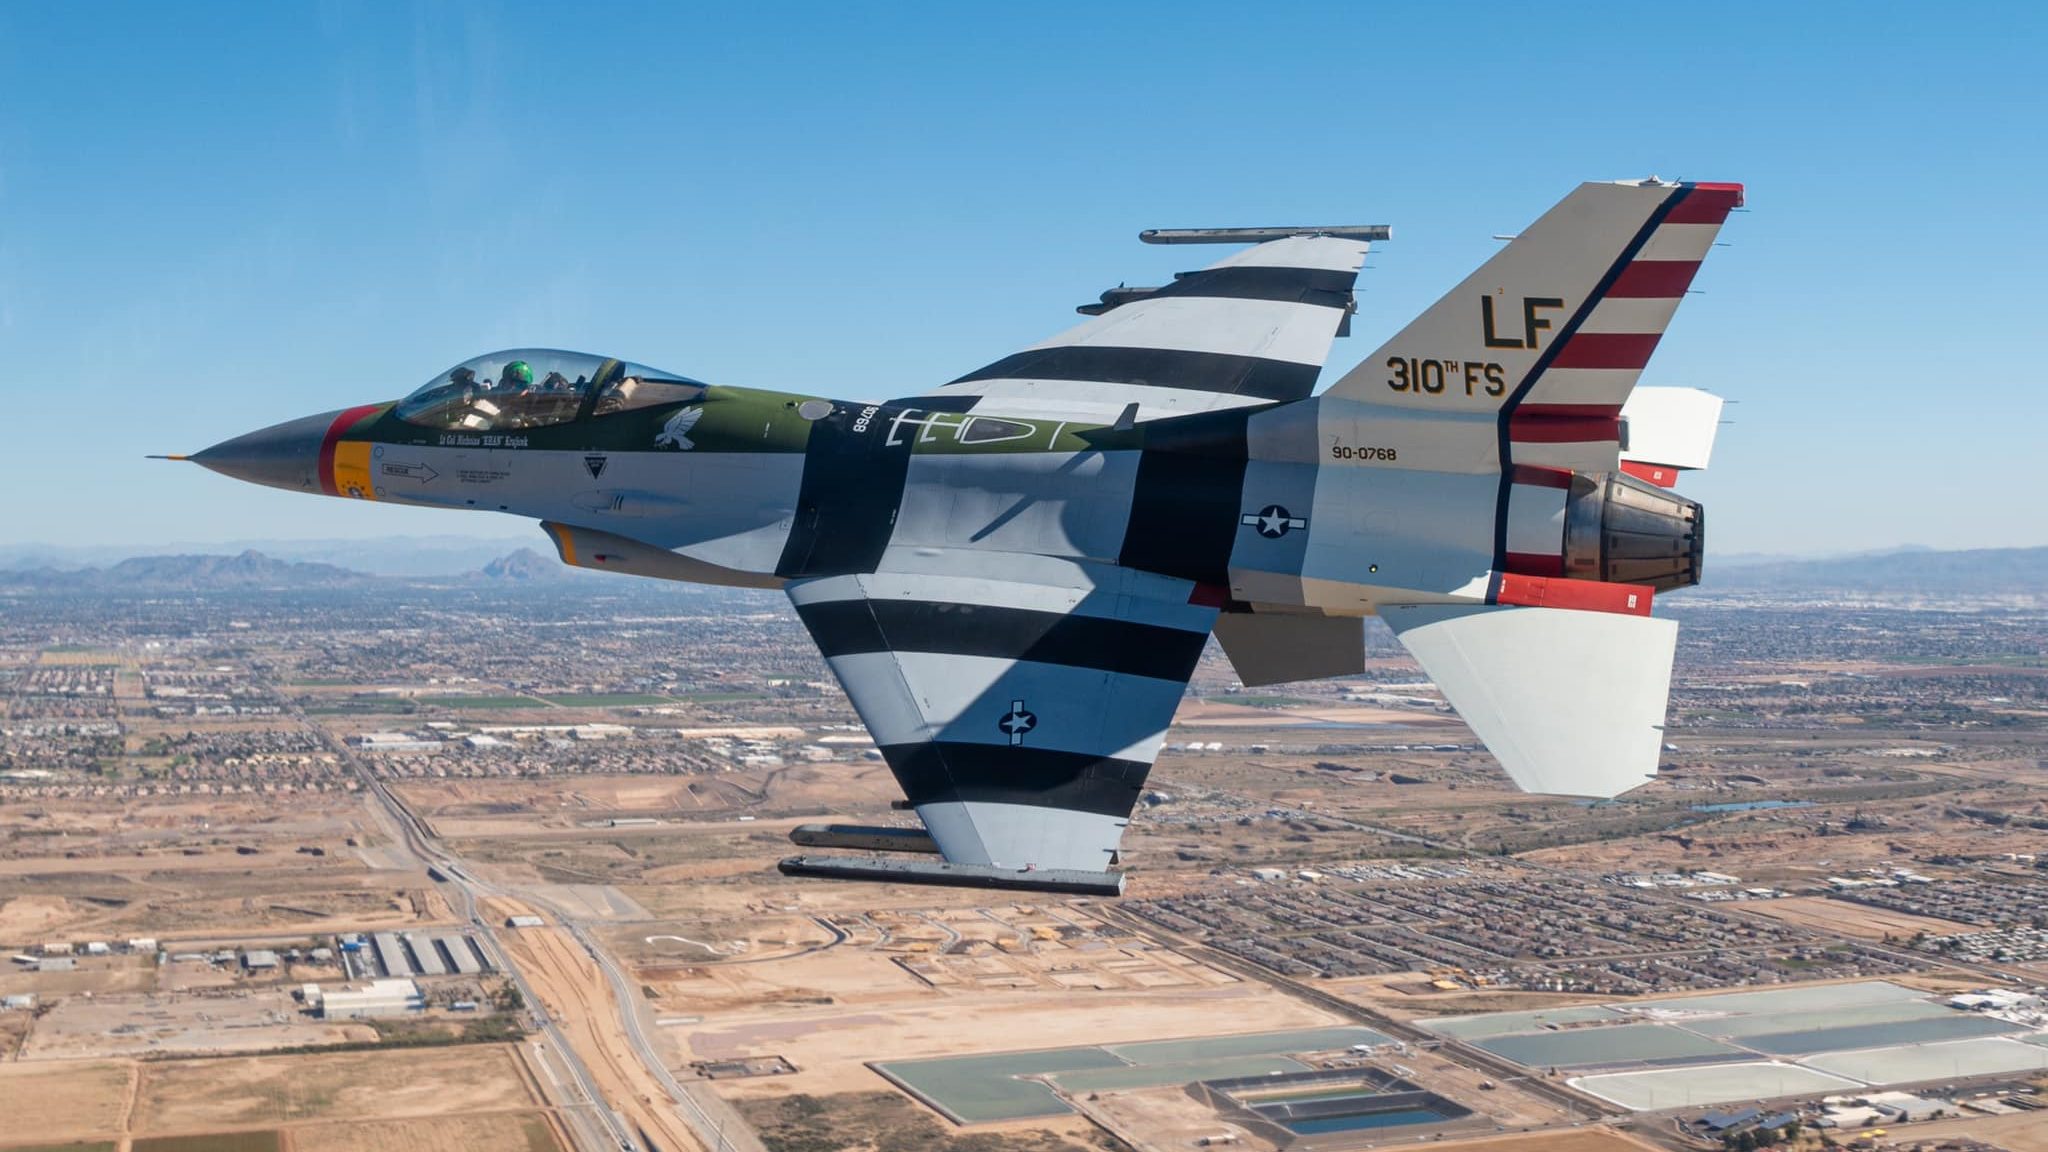 Luke Days airshow in Phoenix canceled due to logistical strain, COVID